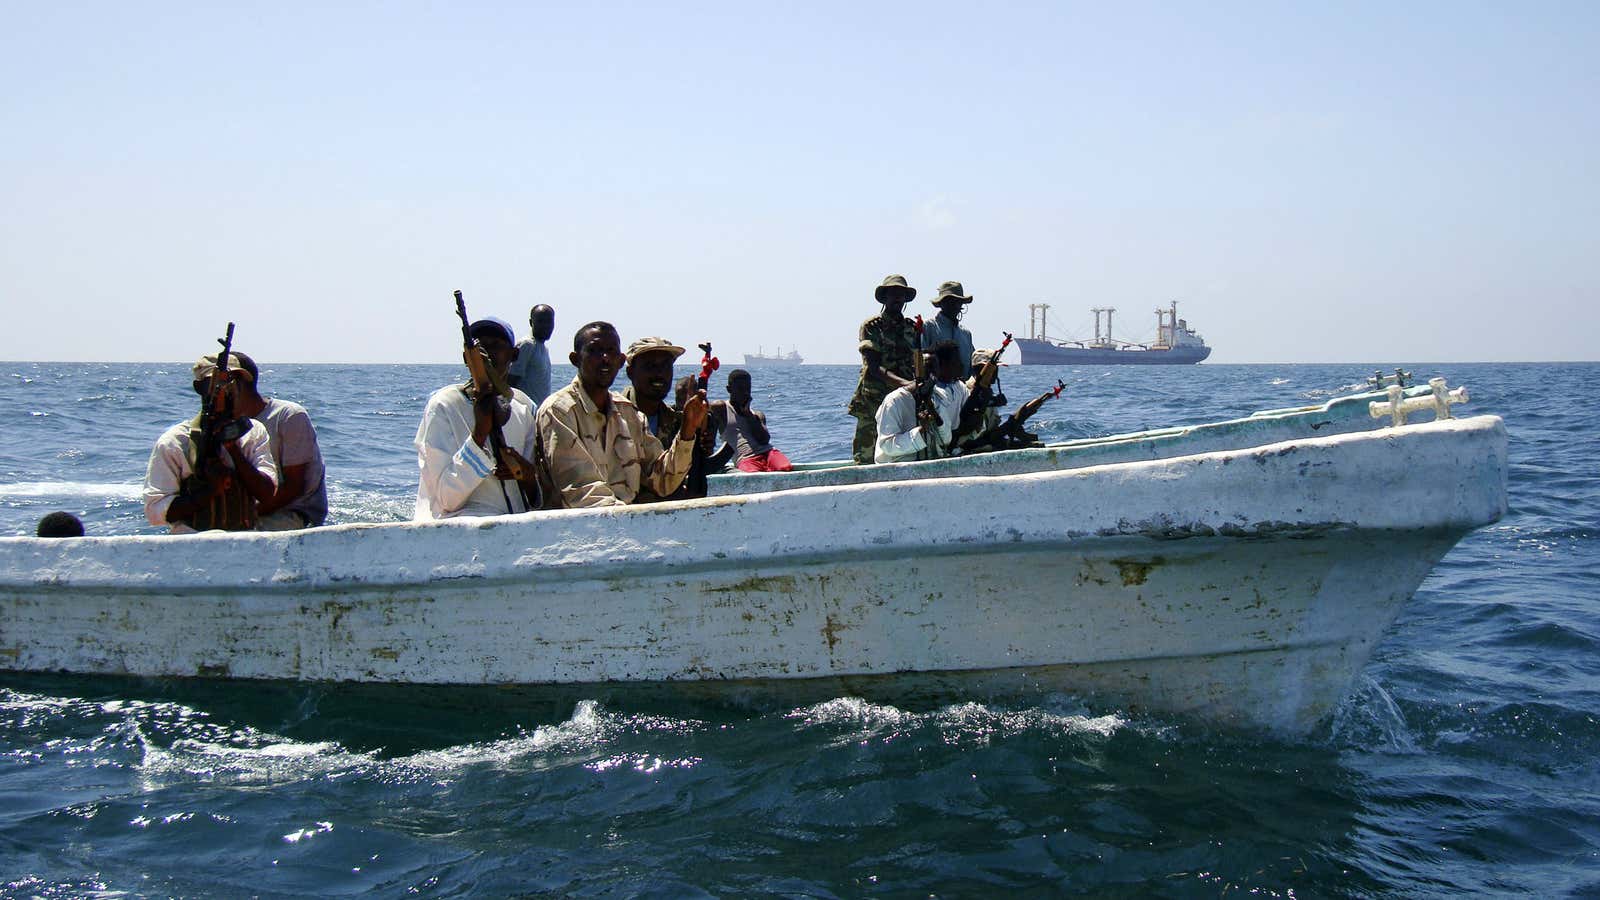 The Somali coast is no longer the most dangerous in the world.